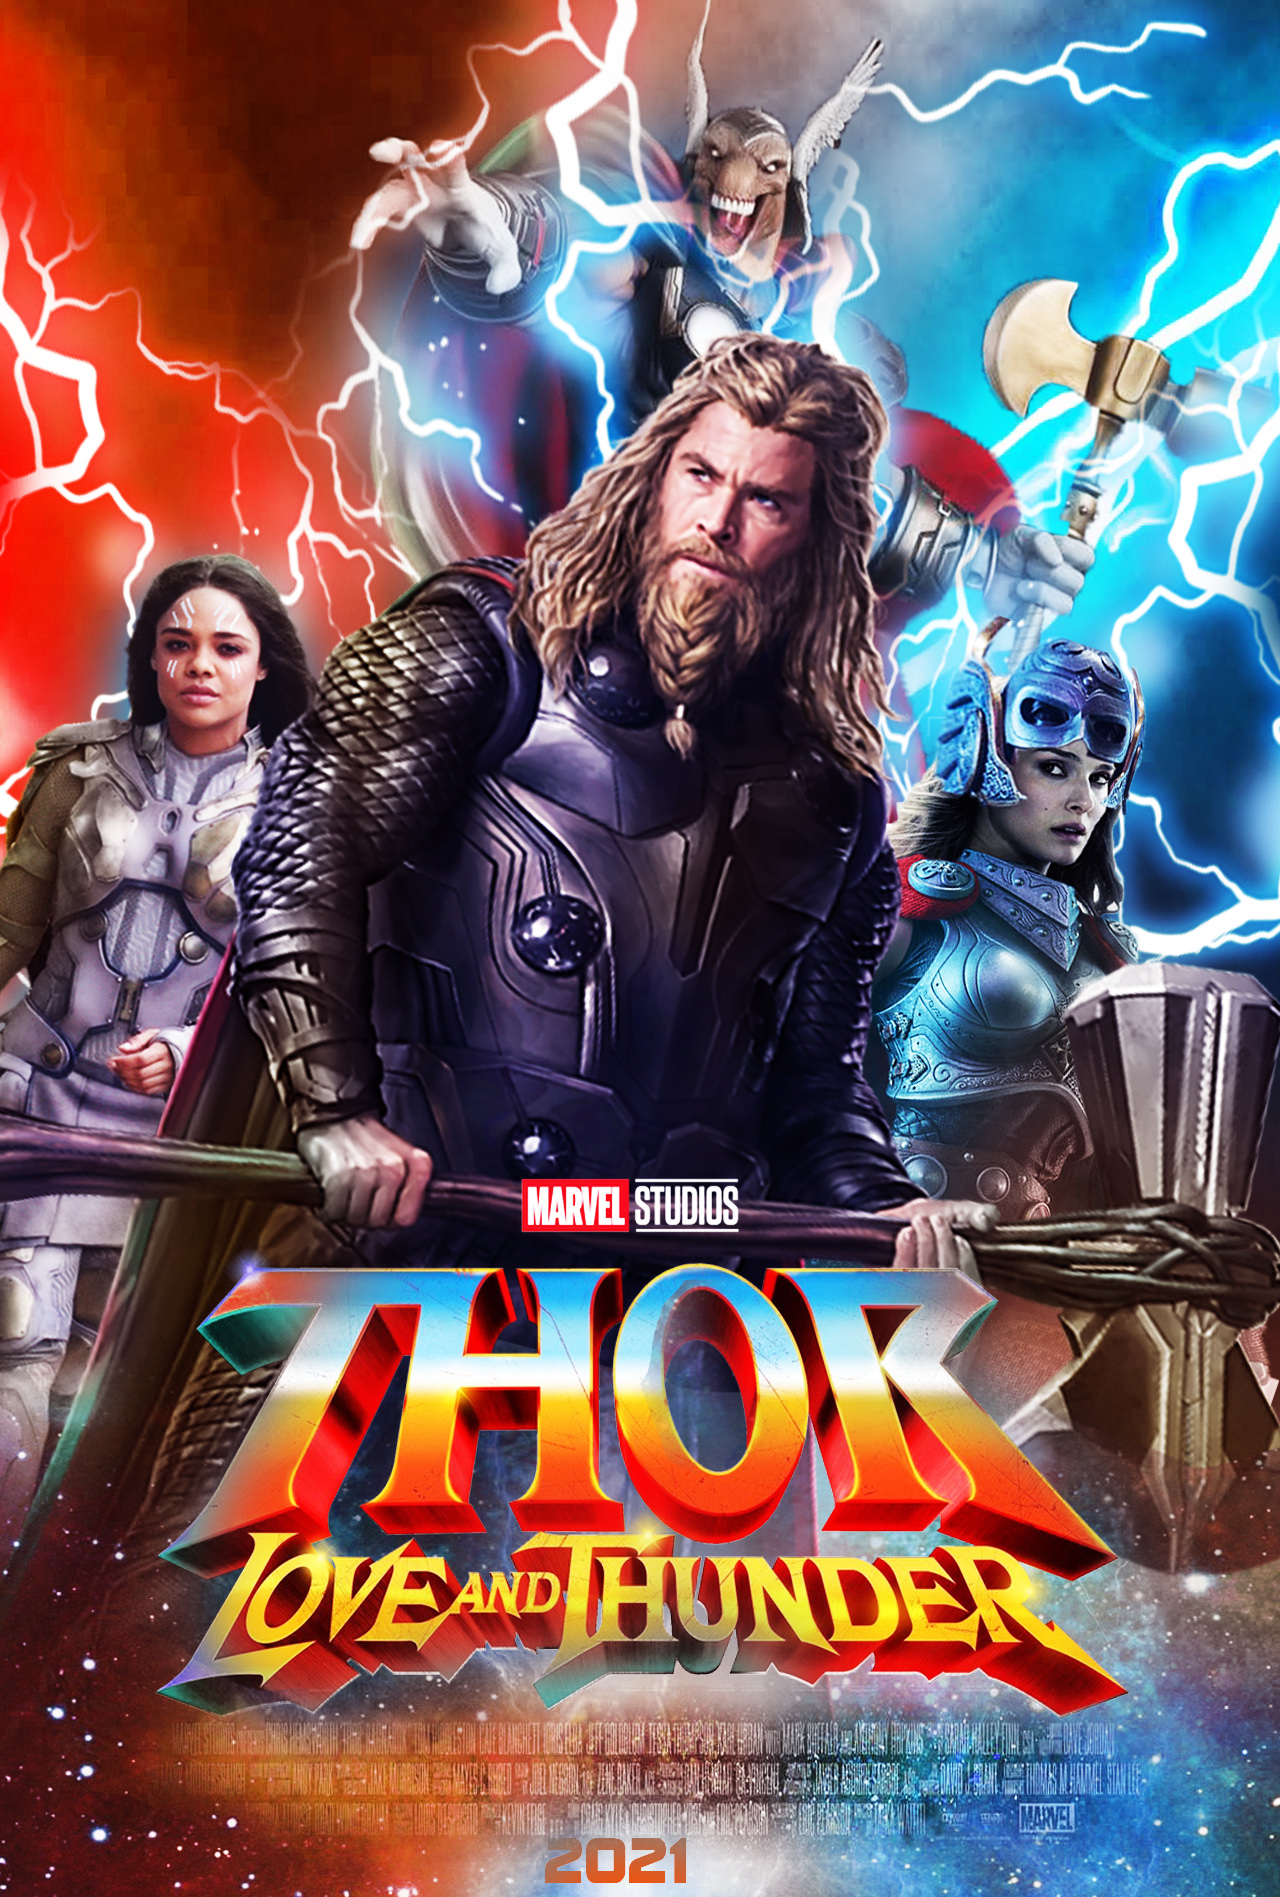 Thor: Love and Thunder Poster by Thekingblader995 on DeviantArt